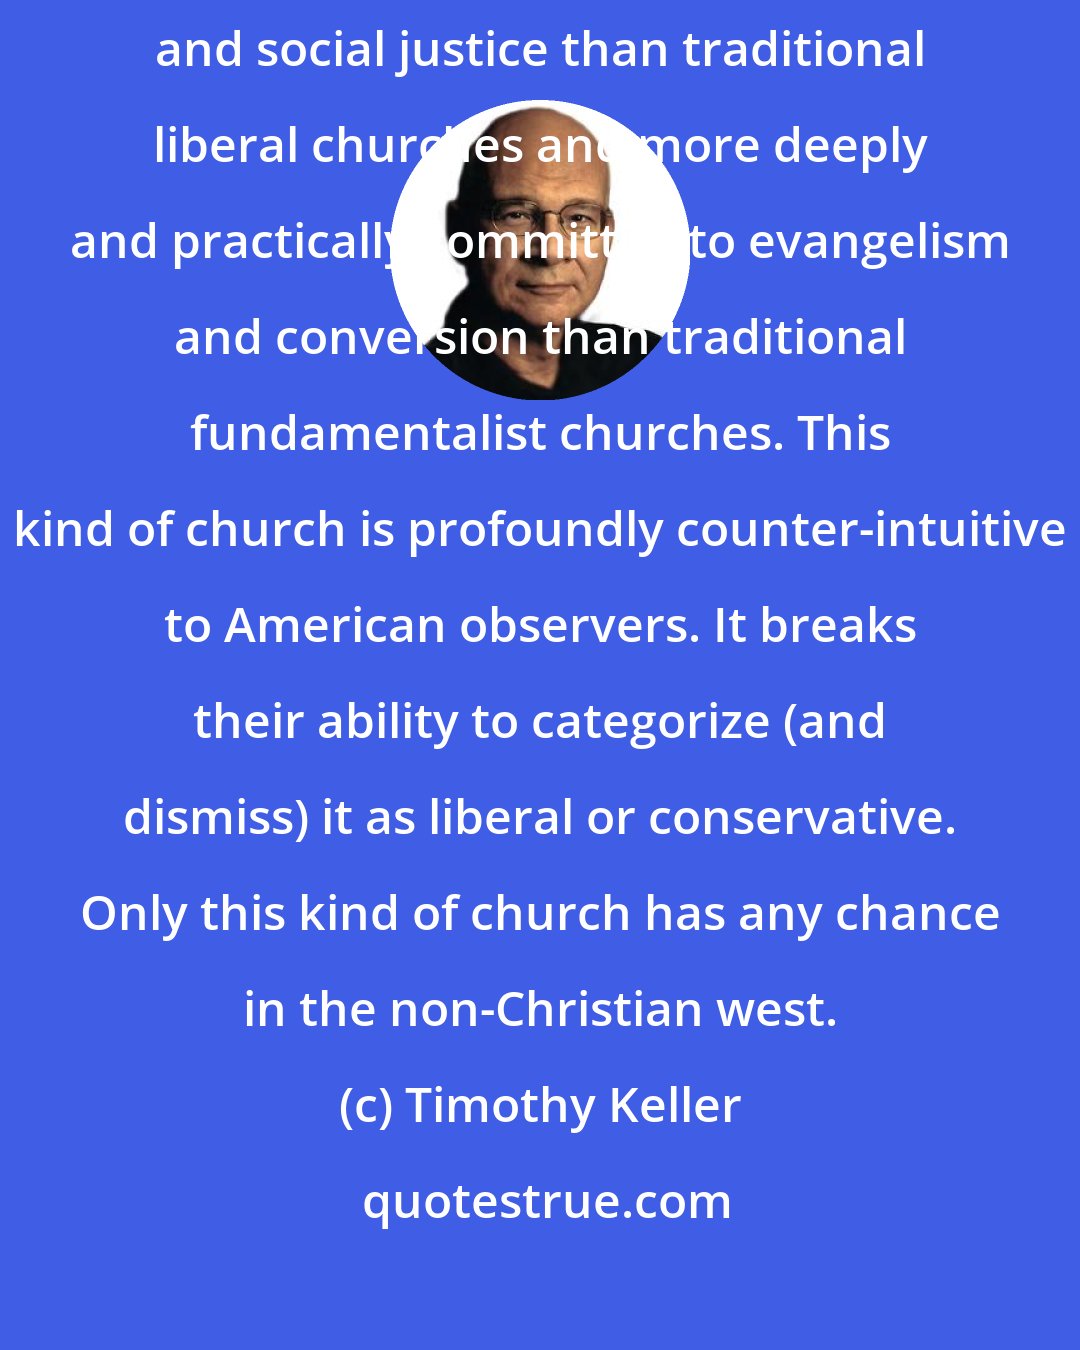 Timothy Keller: A church must be more deeply and practically committed to deeds of compassion and social justice than traditional liberal churches and more deeply and practically committed to evangelism and conversion than traditional fundamentalist churches. This kind of church is profoundly counter-intuitive to American observers. It breaks their ability to categorize (and dismiss) it as liberal or conservative. Only this kind of church has any chance in the non-Christian west.